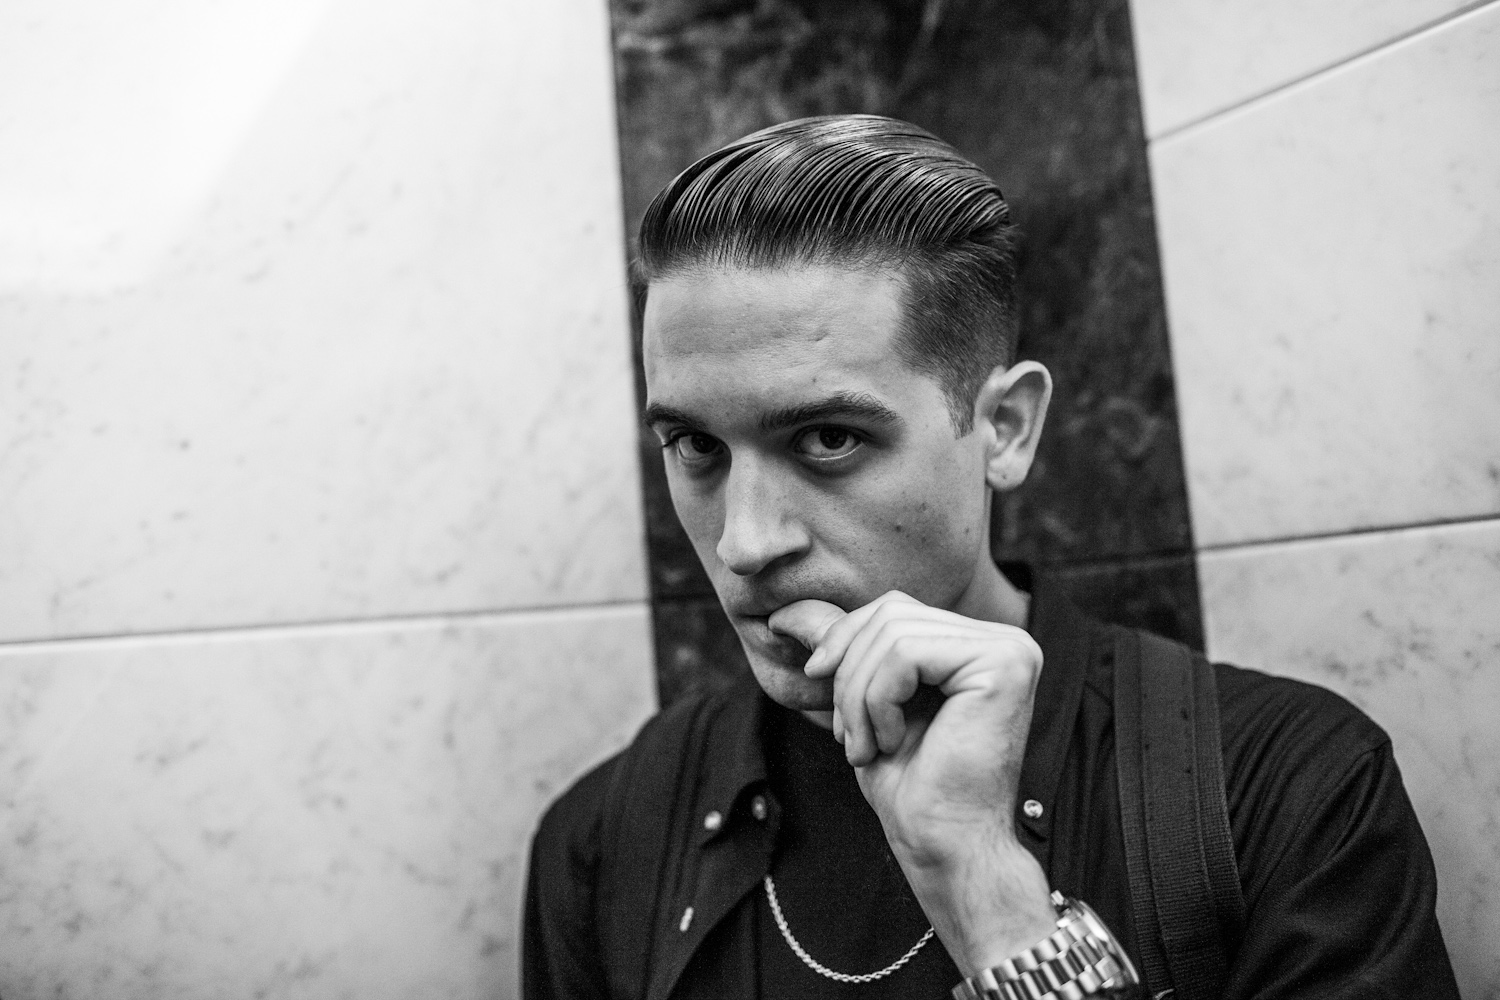 10 Things Nobody Told You About G Eazy Hairstyle g eazy.